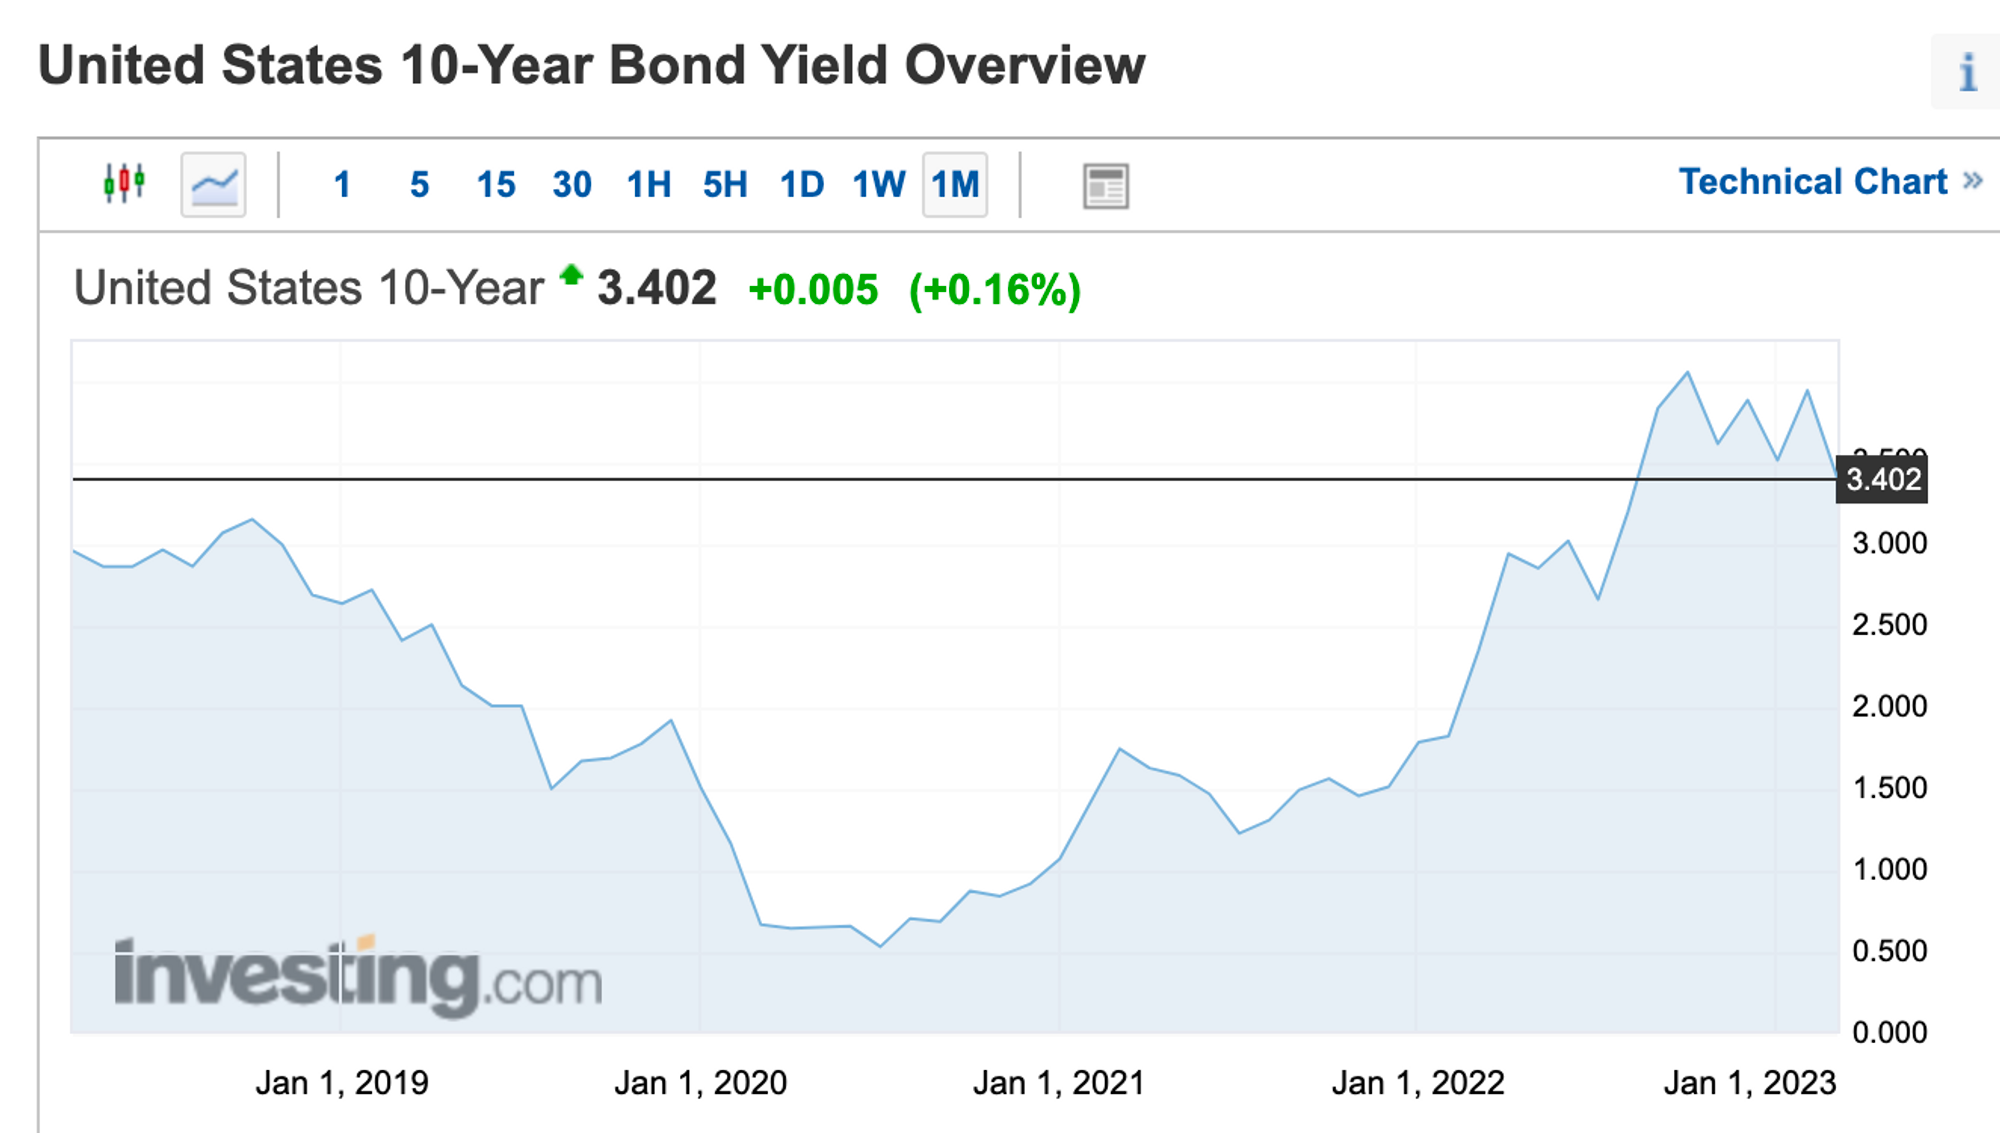 US 10-year bond yield overview